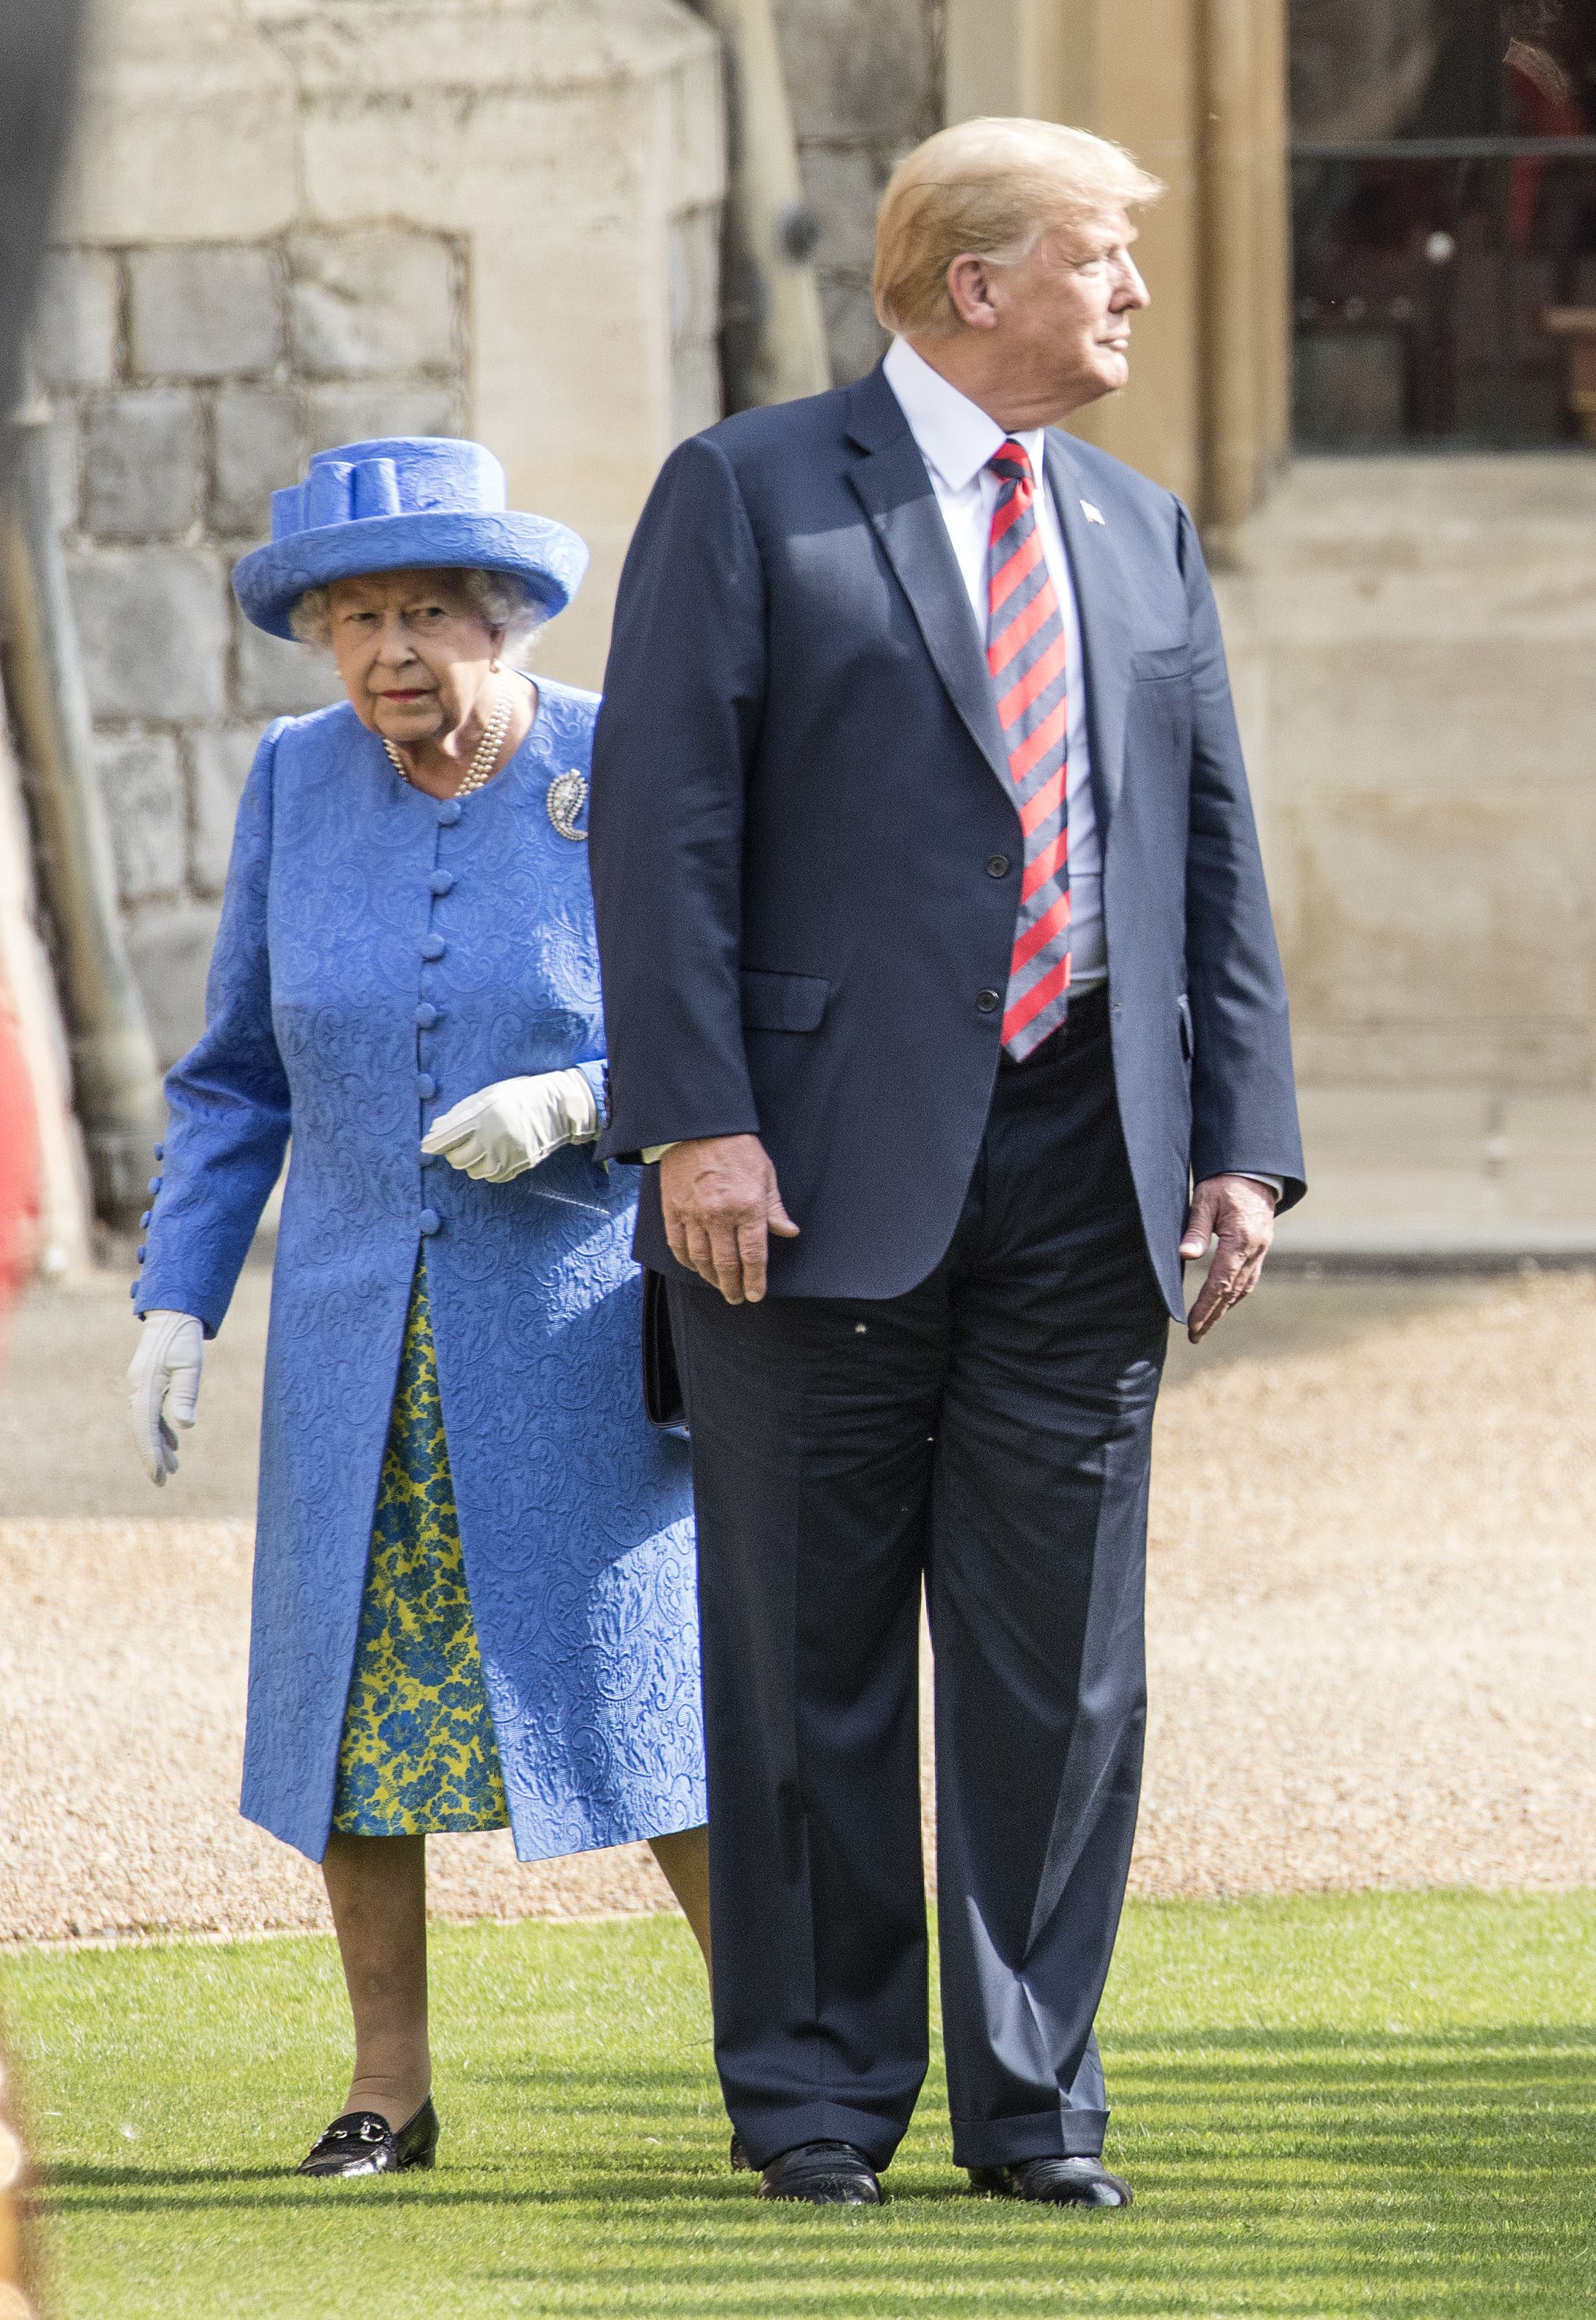 Did the Queen snub Donald Trump through her brooches?